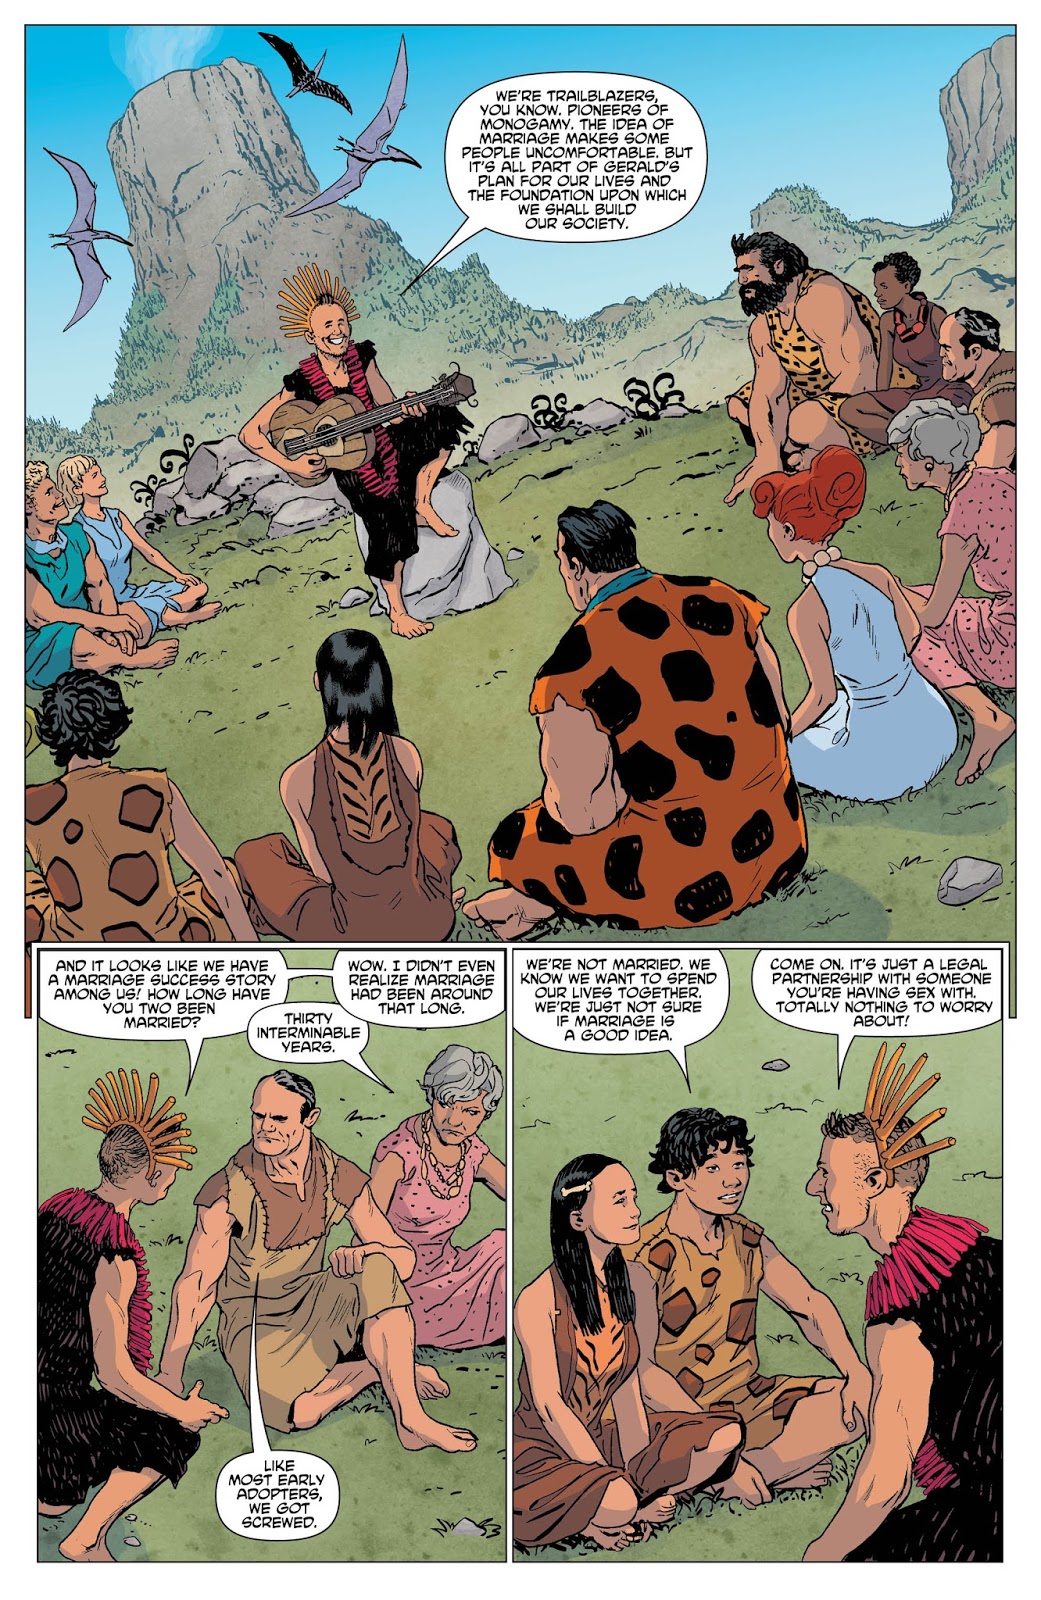 Weird Science DC Comics The Flintstones #4 Review and ** SPOILERS** picture